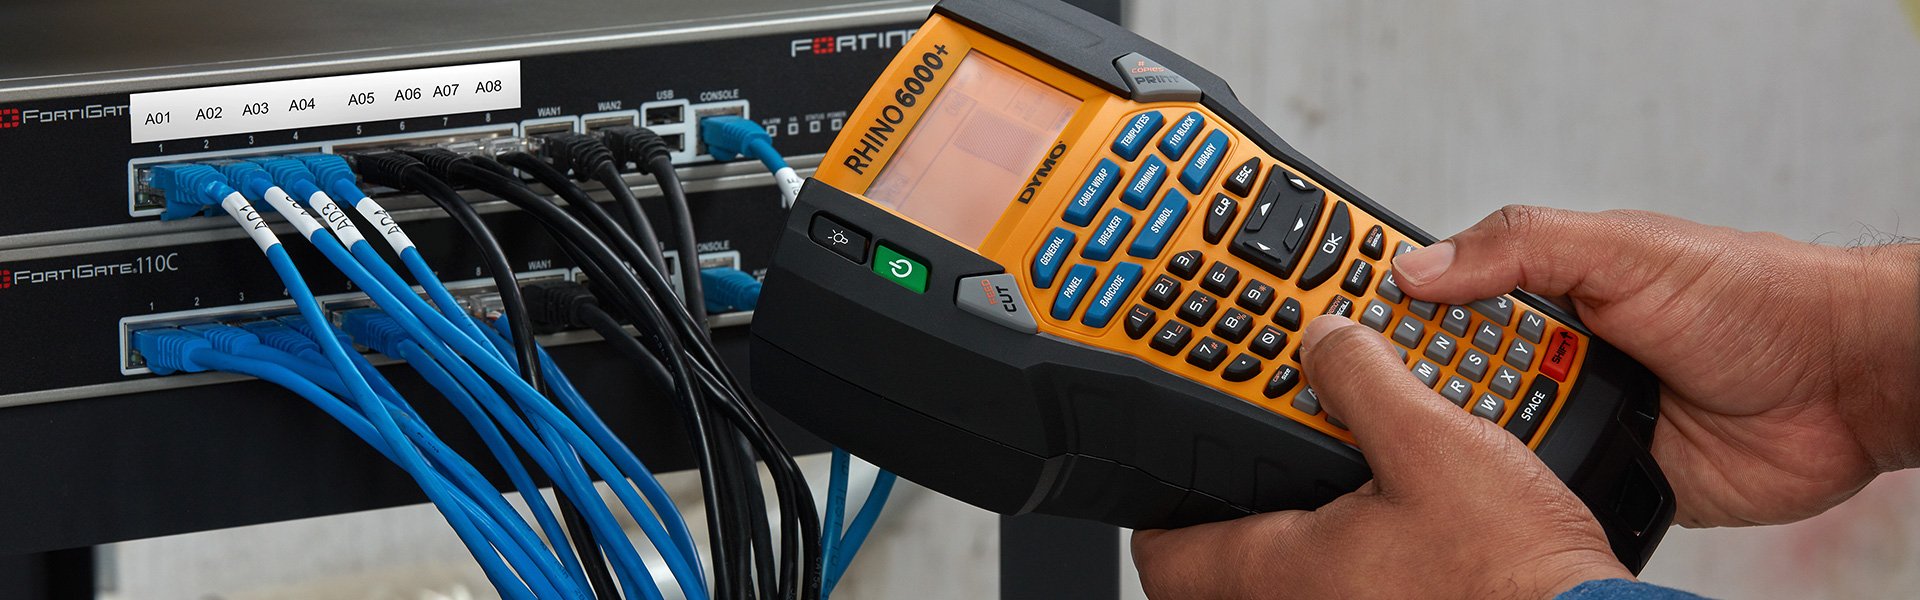 A person using a Rhino 6000 plus label maker to create a label for an electronic wiring panel.